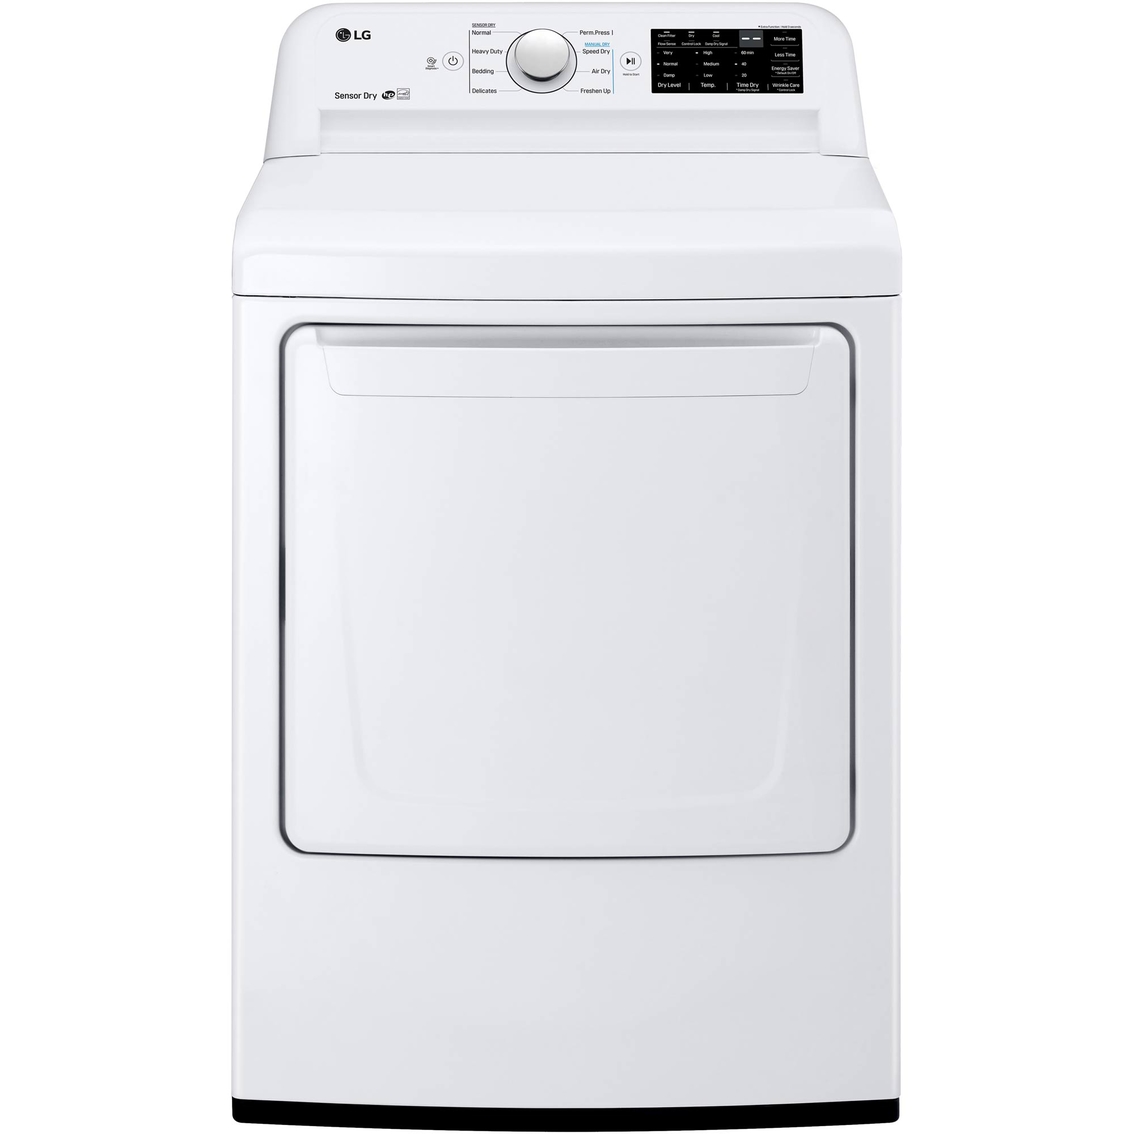 lg-energy-star-7-3-cu-ft-electric-dryer-with-sensor-dry-technology